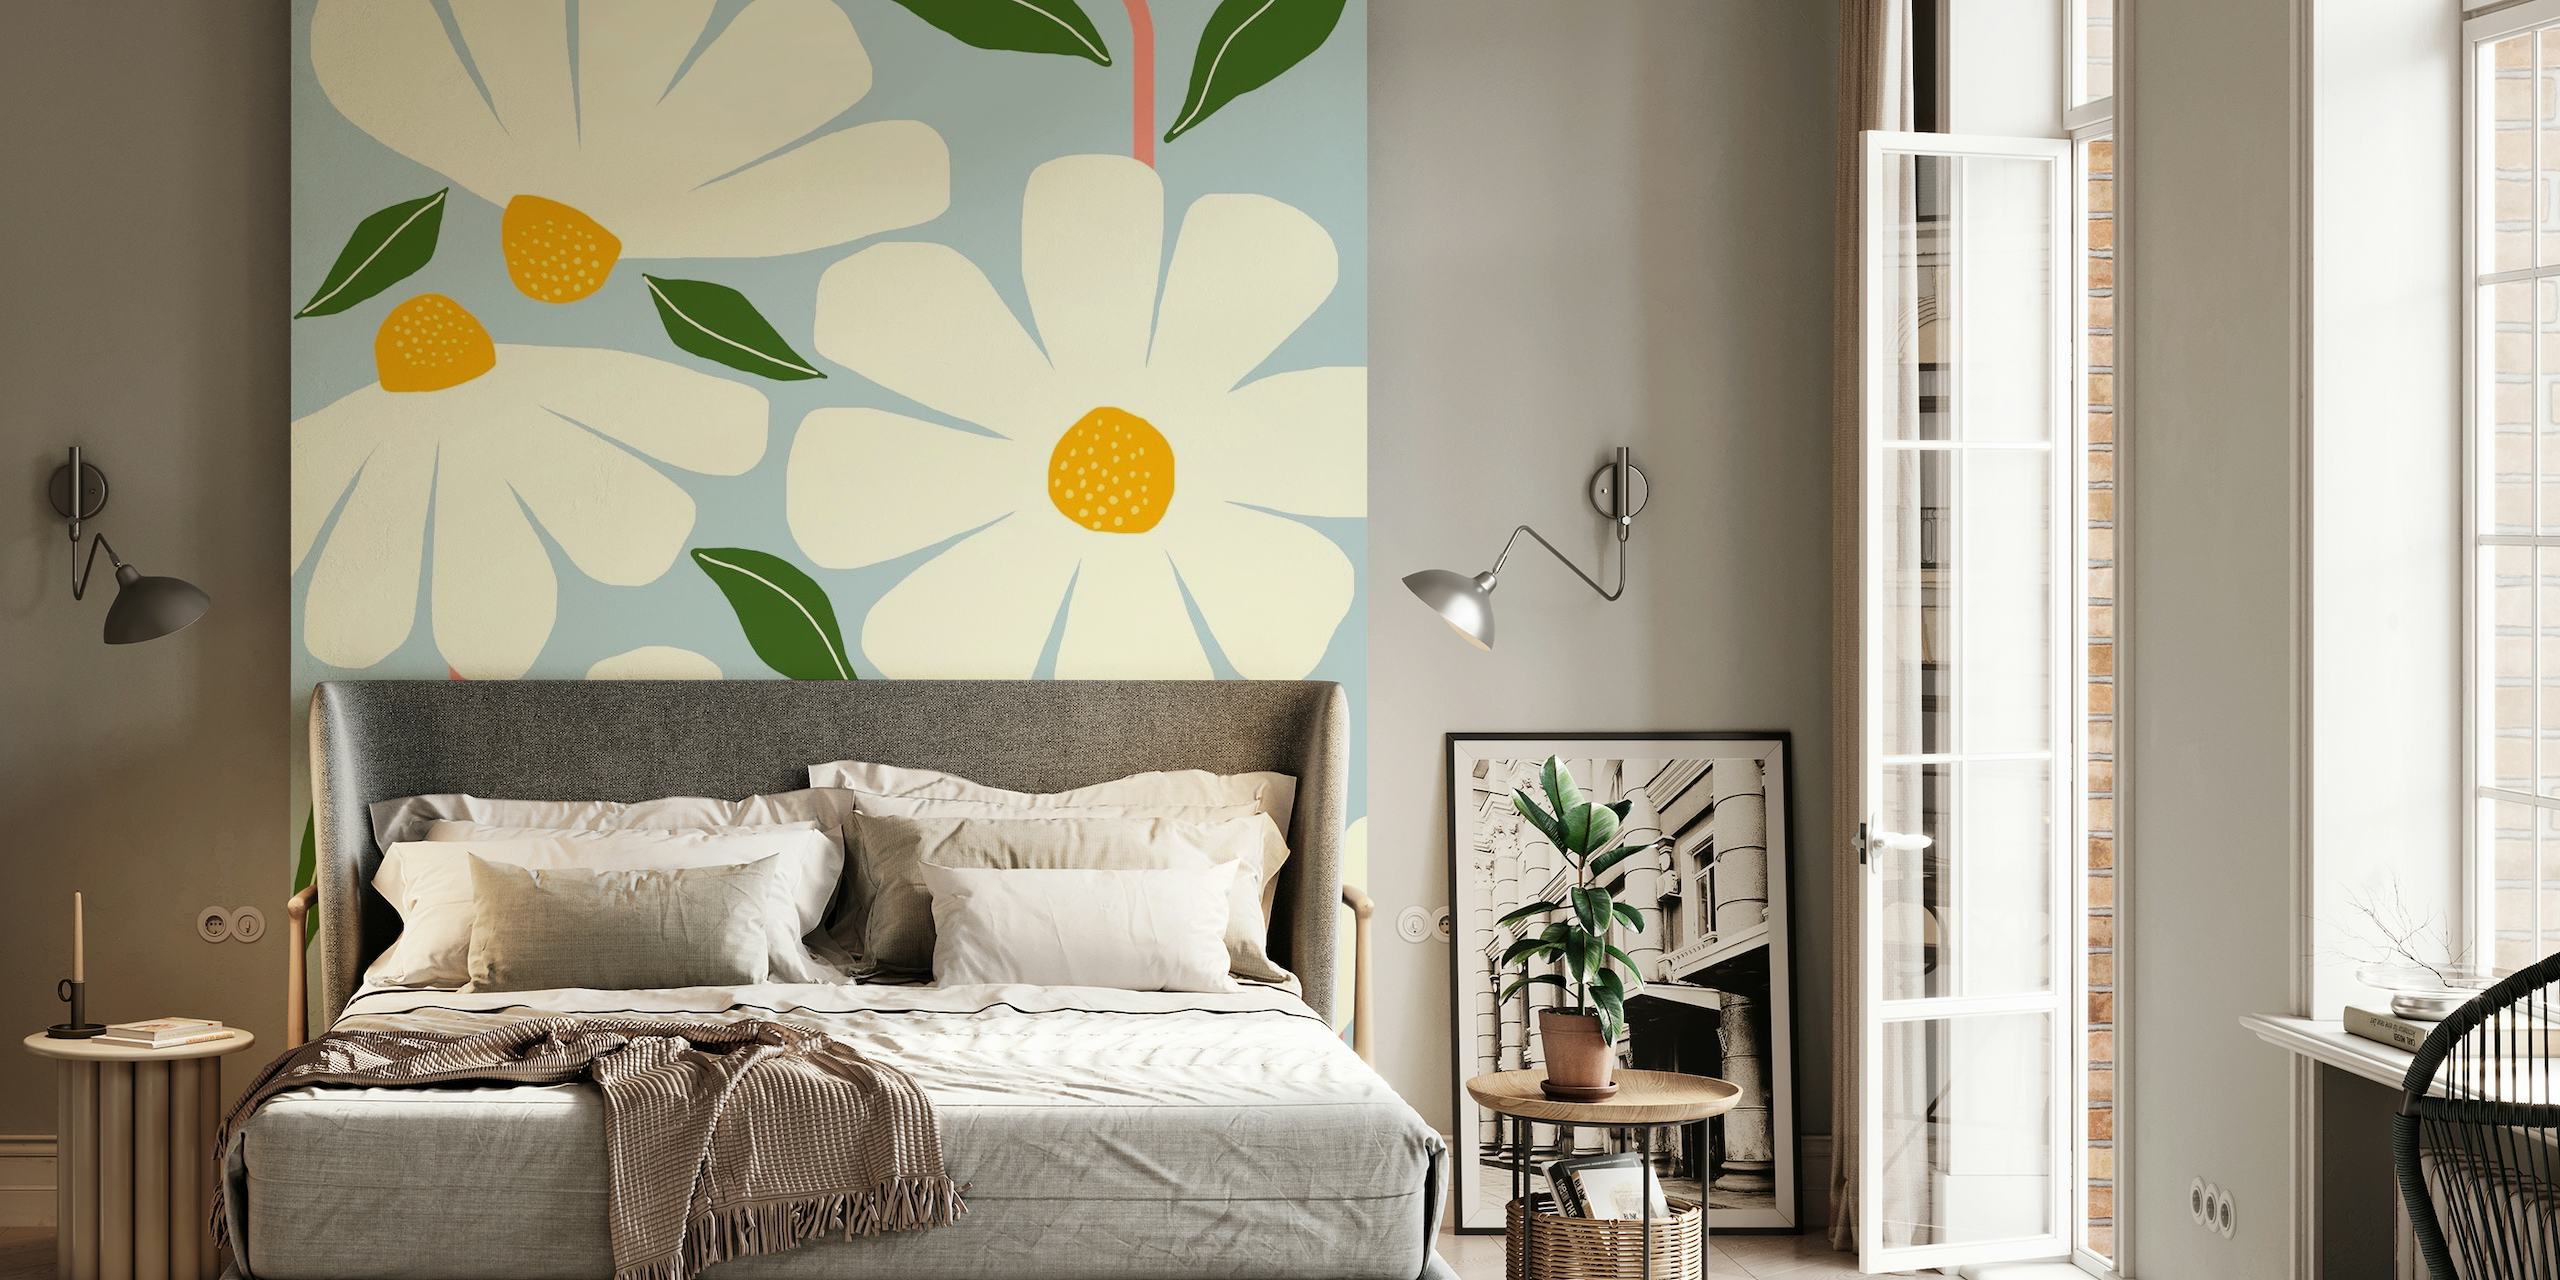 Oversized white daisies with yellow centers on a blue background wall mural